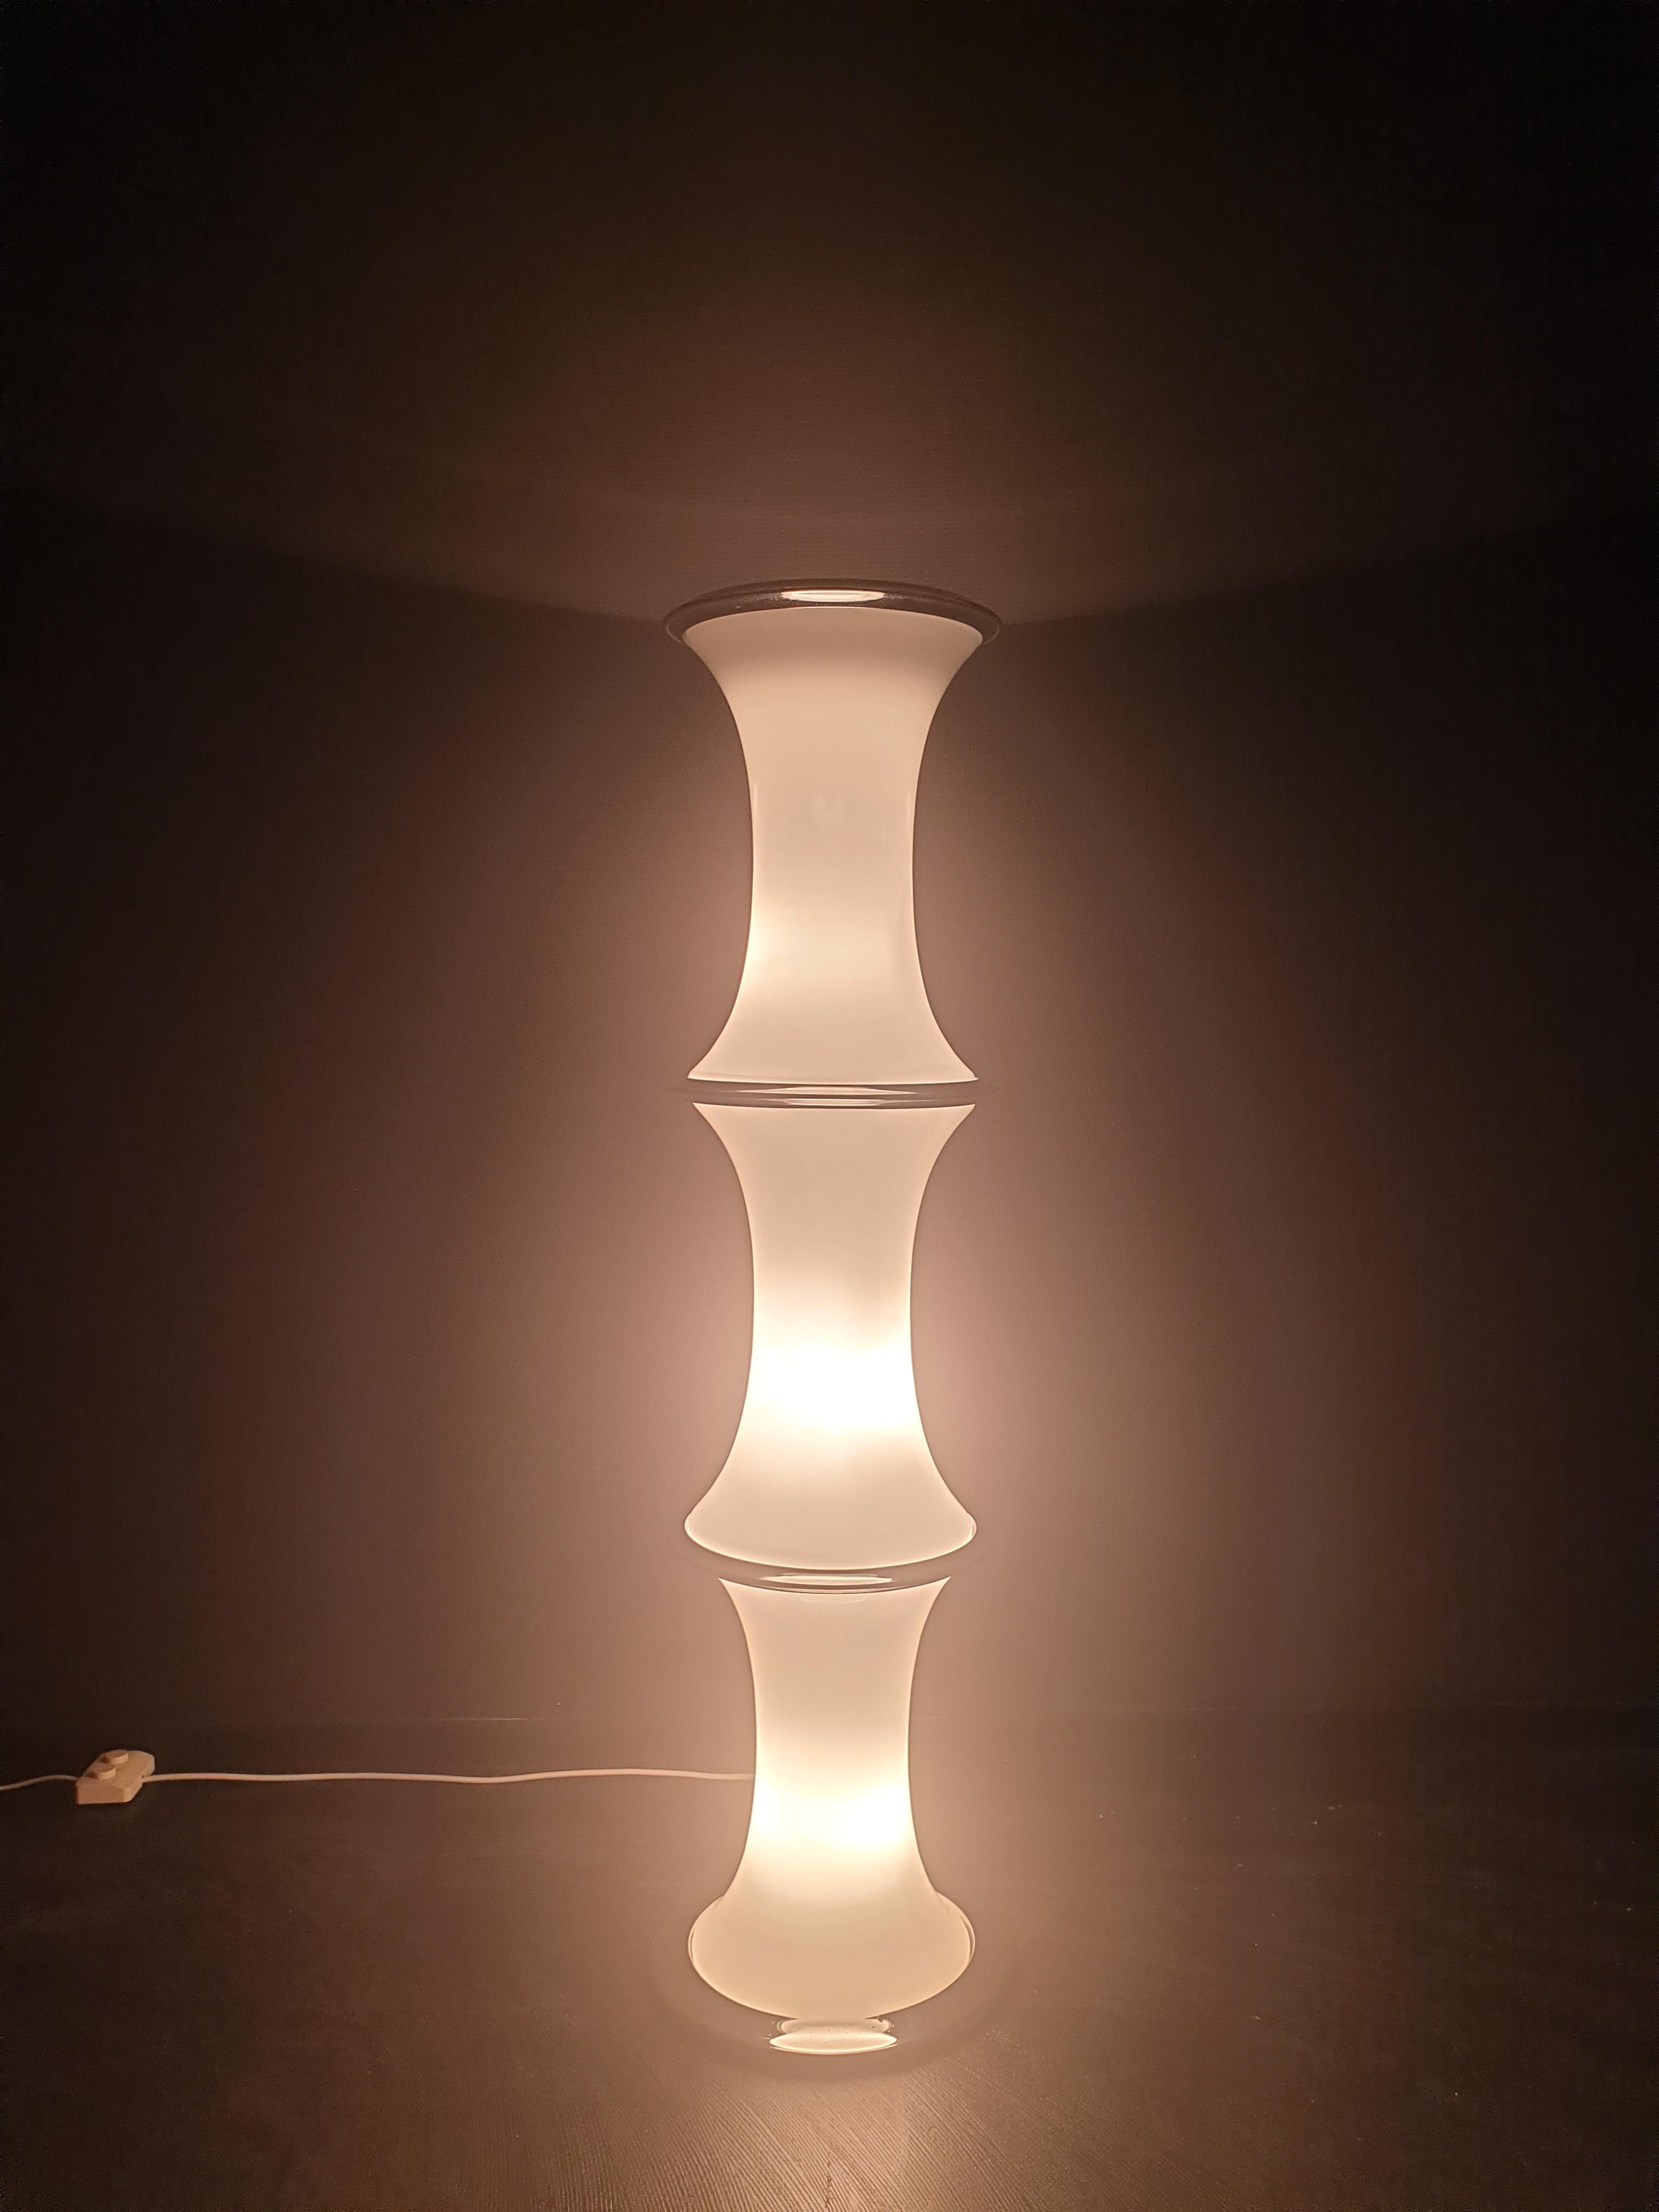 Bamboo Floor Lamp by Enrico Tronconi for Vistosi, 1970's For Sale 2